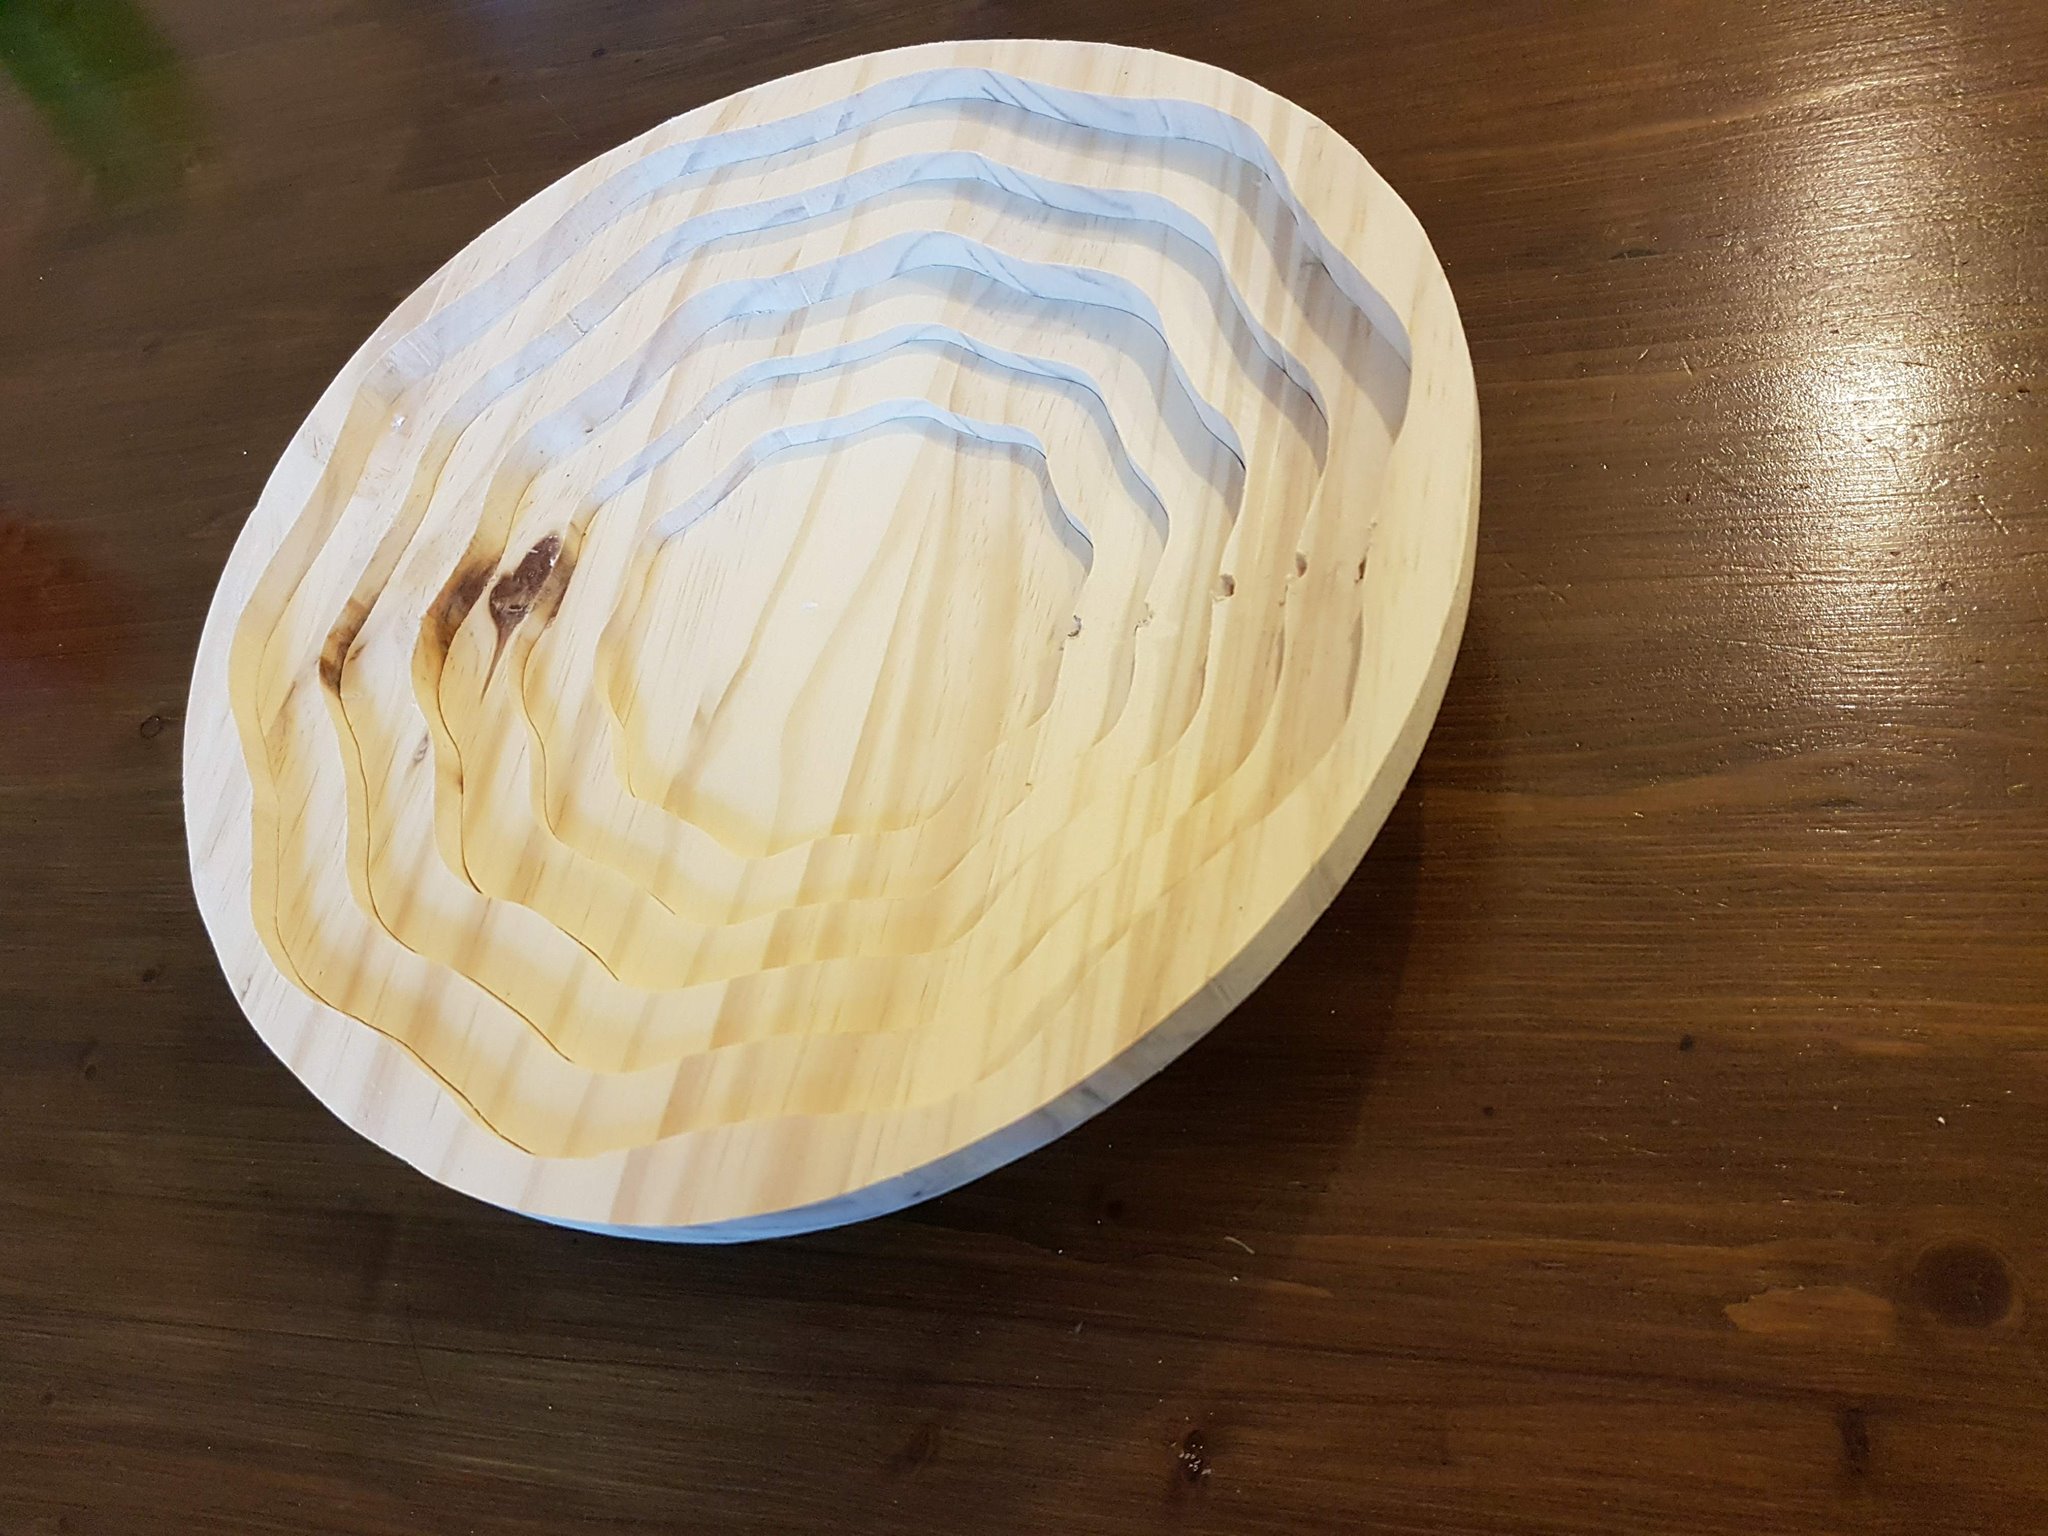 Scroll Saw Basket Bowl - Tutorial and tips